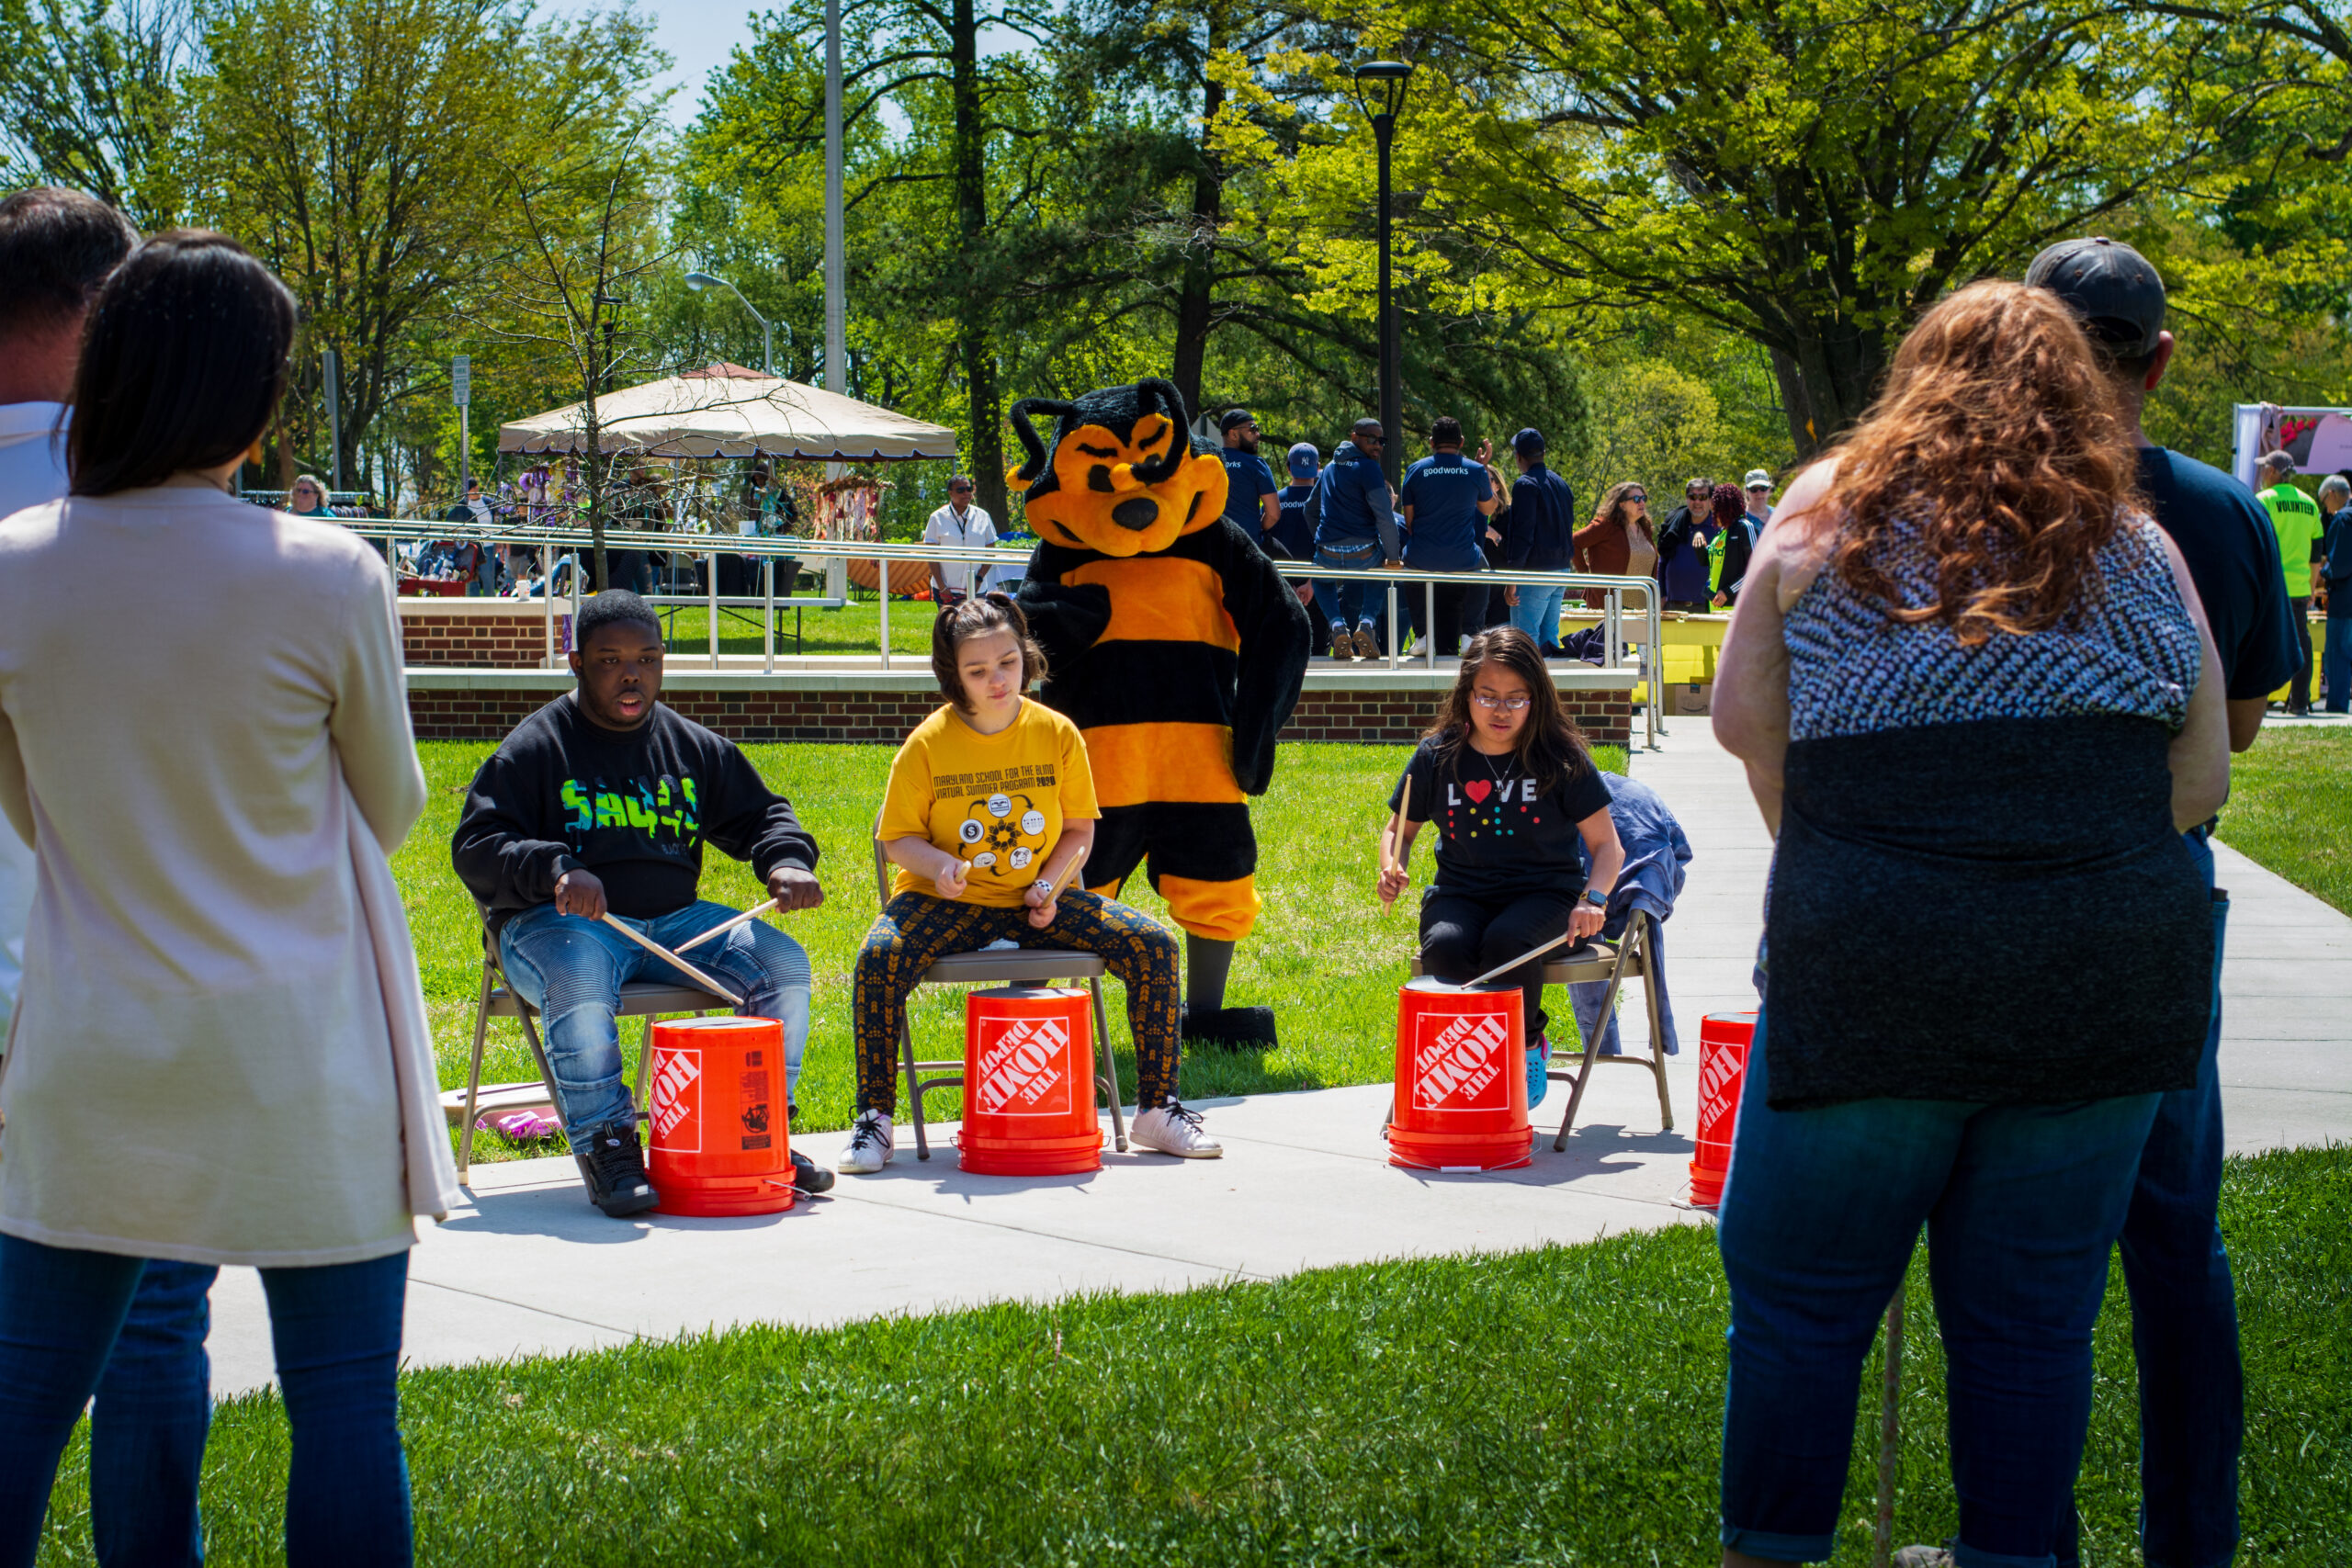 Students drummers with the Bee mascot